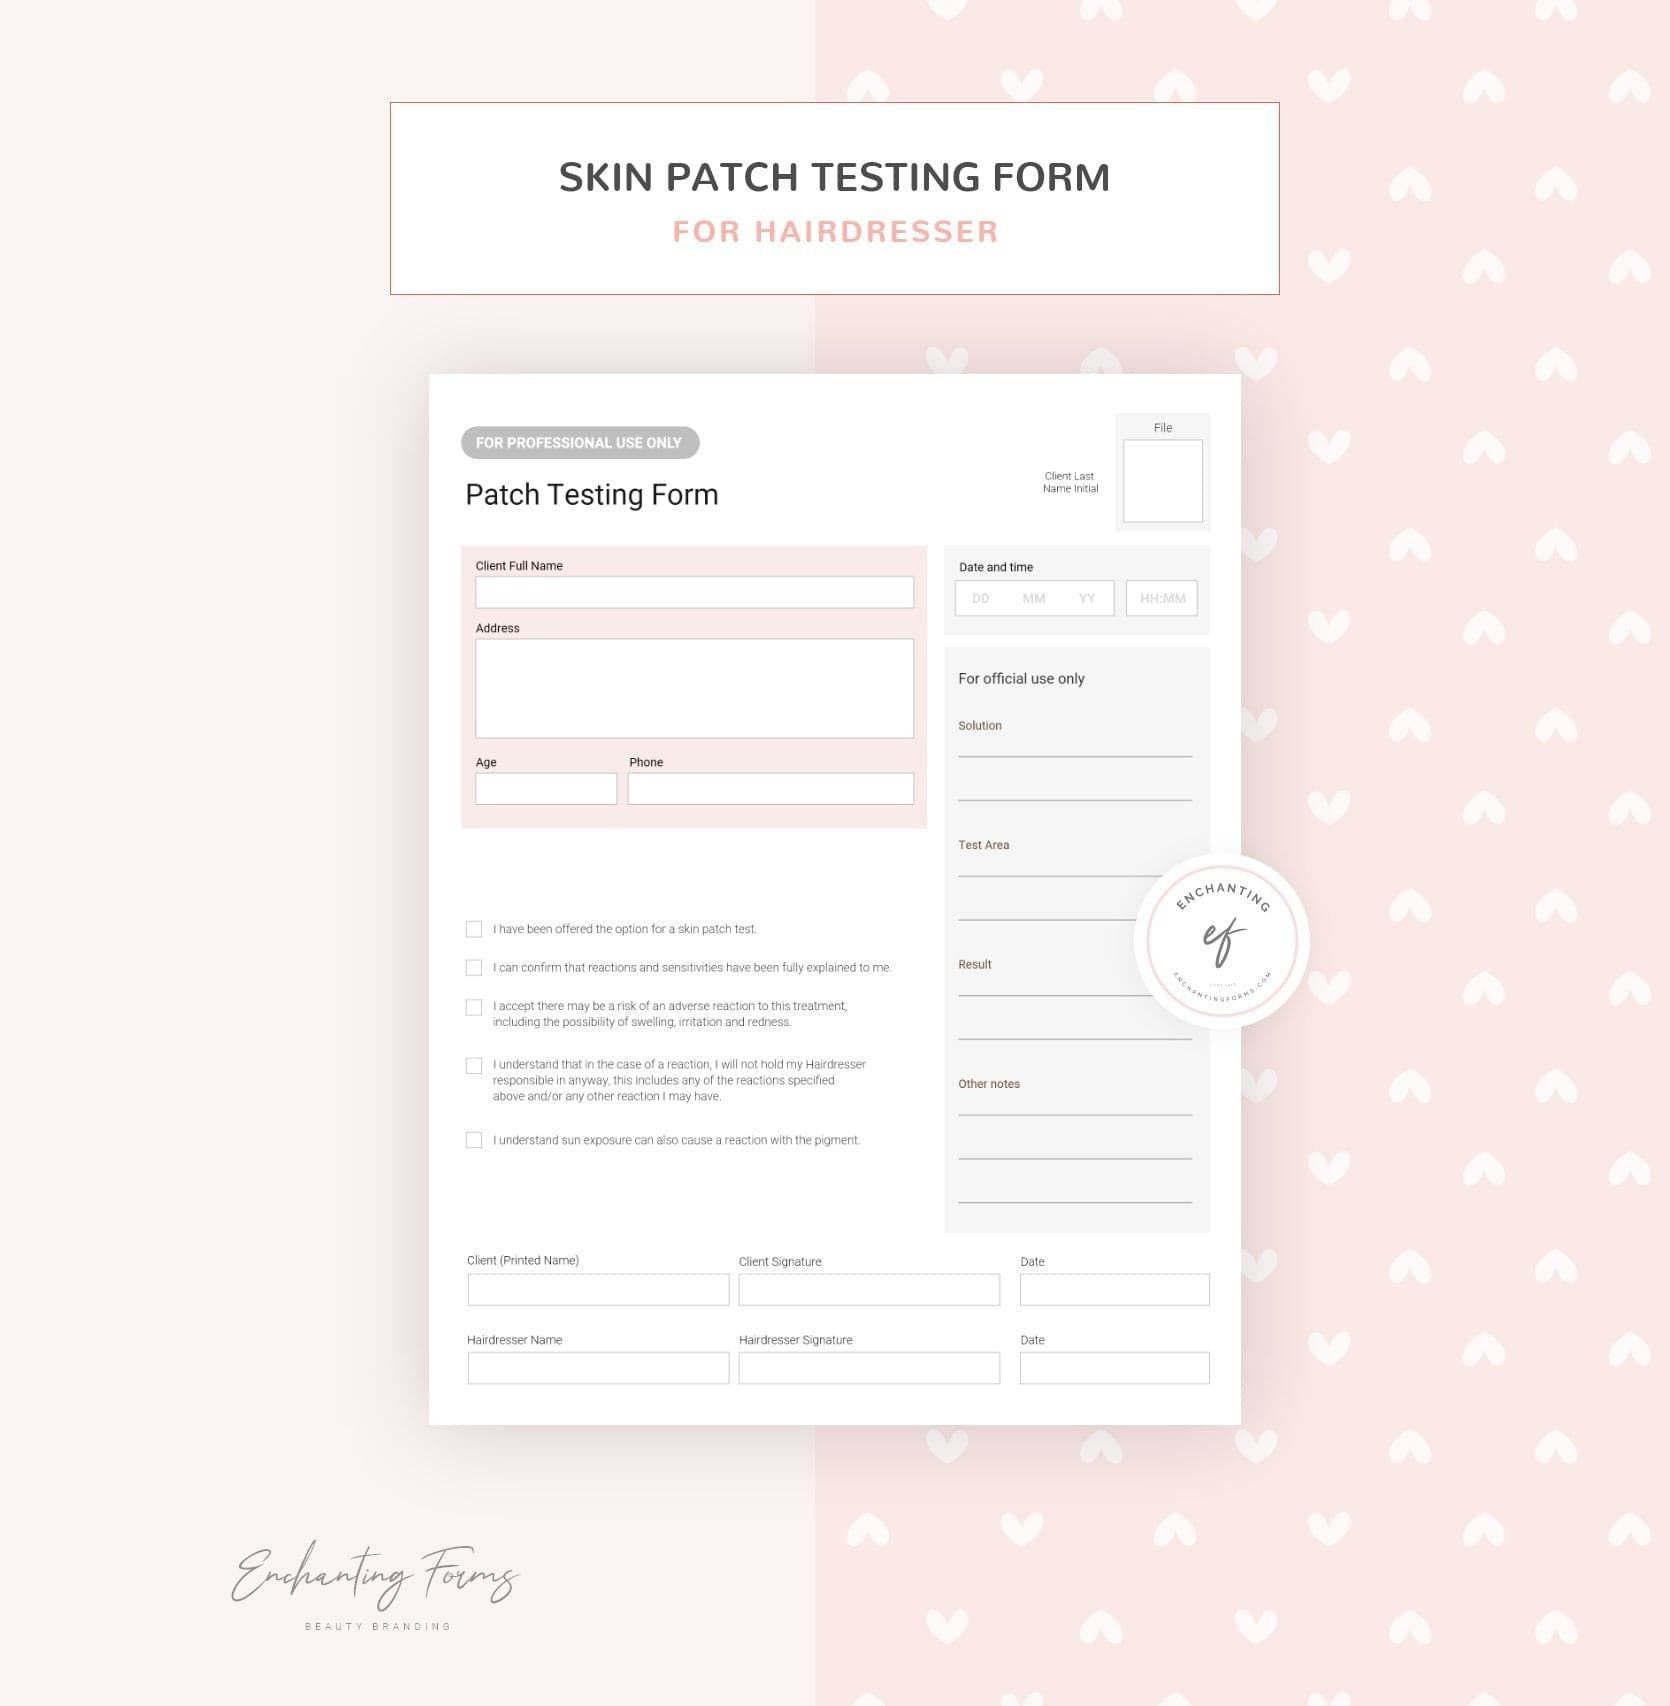 Patch Testing Form for Hairdressers